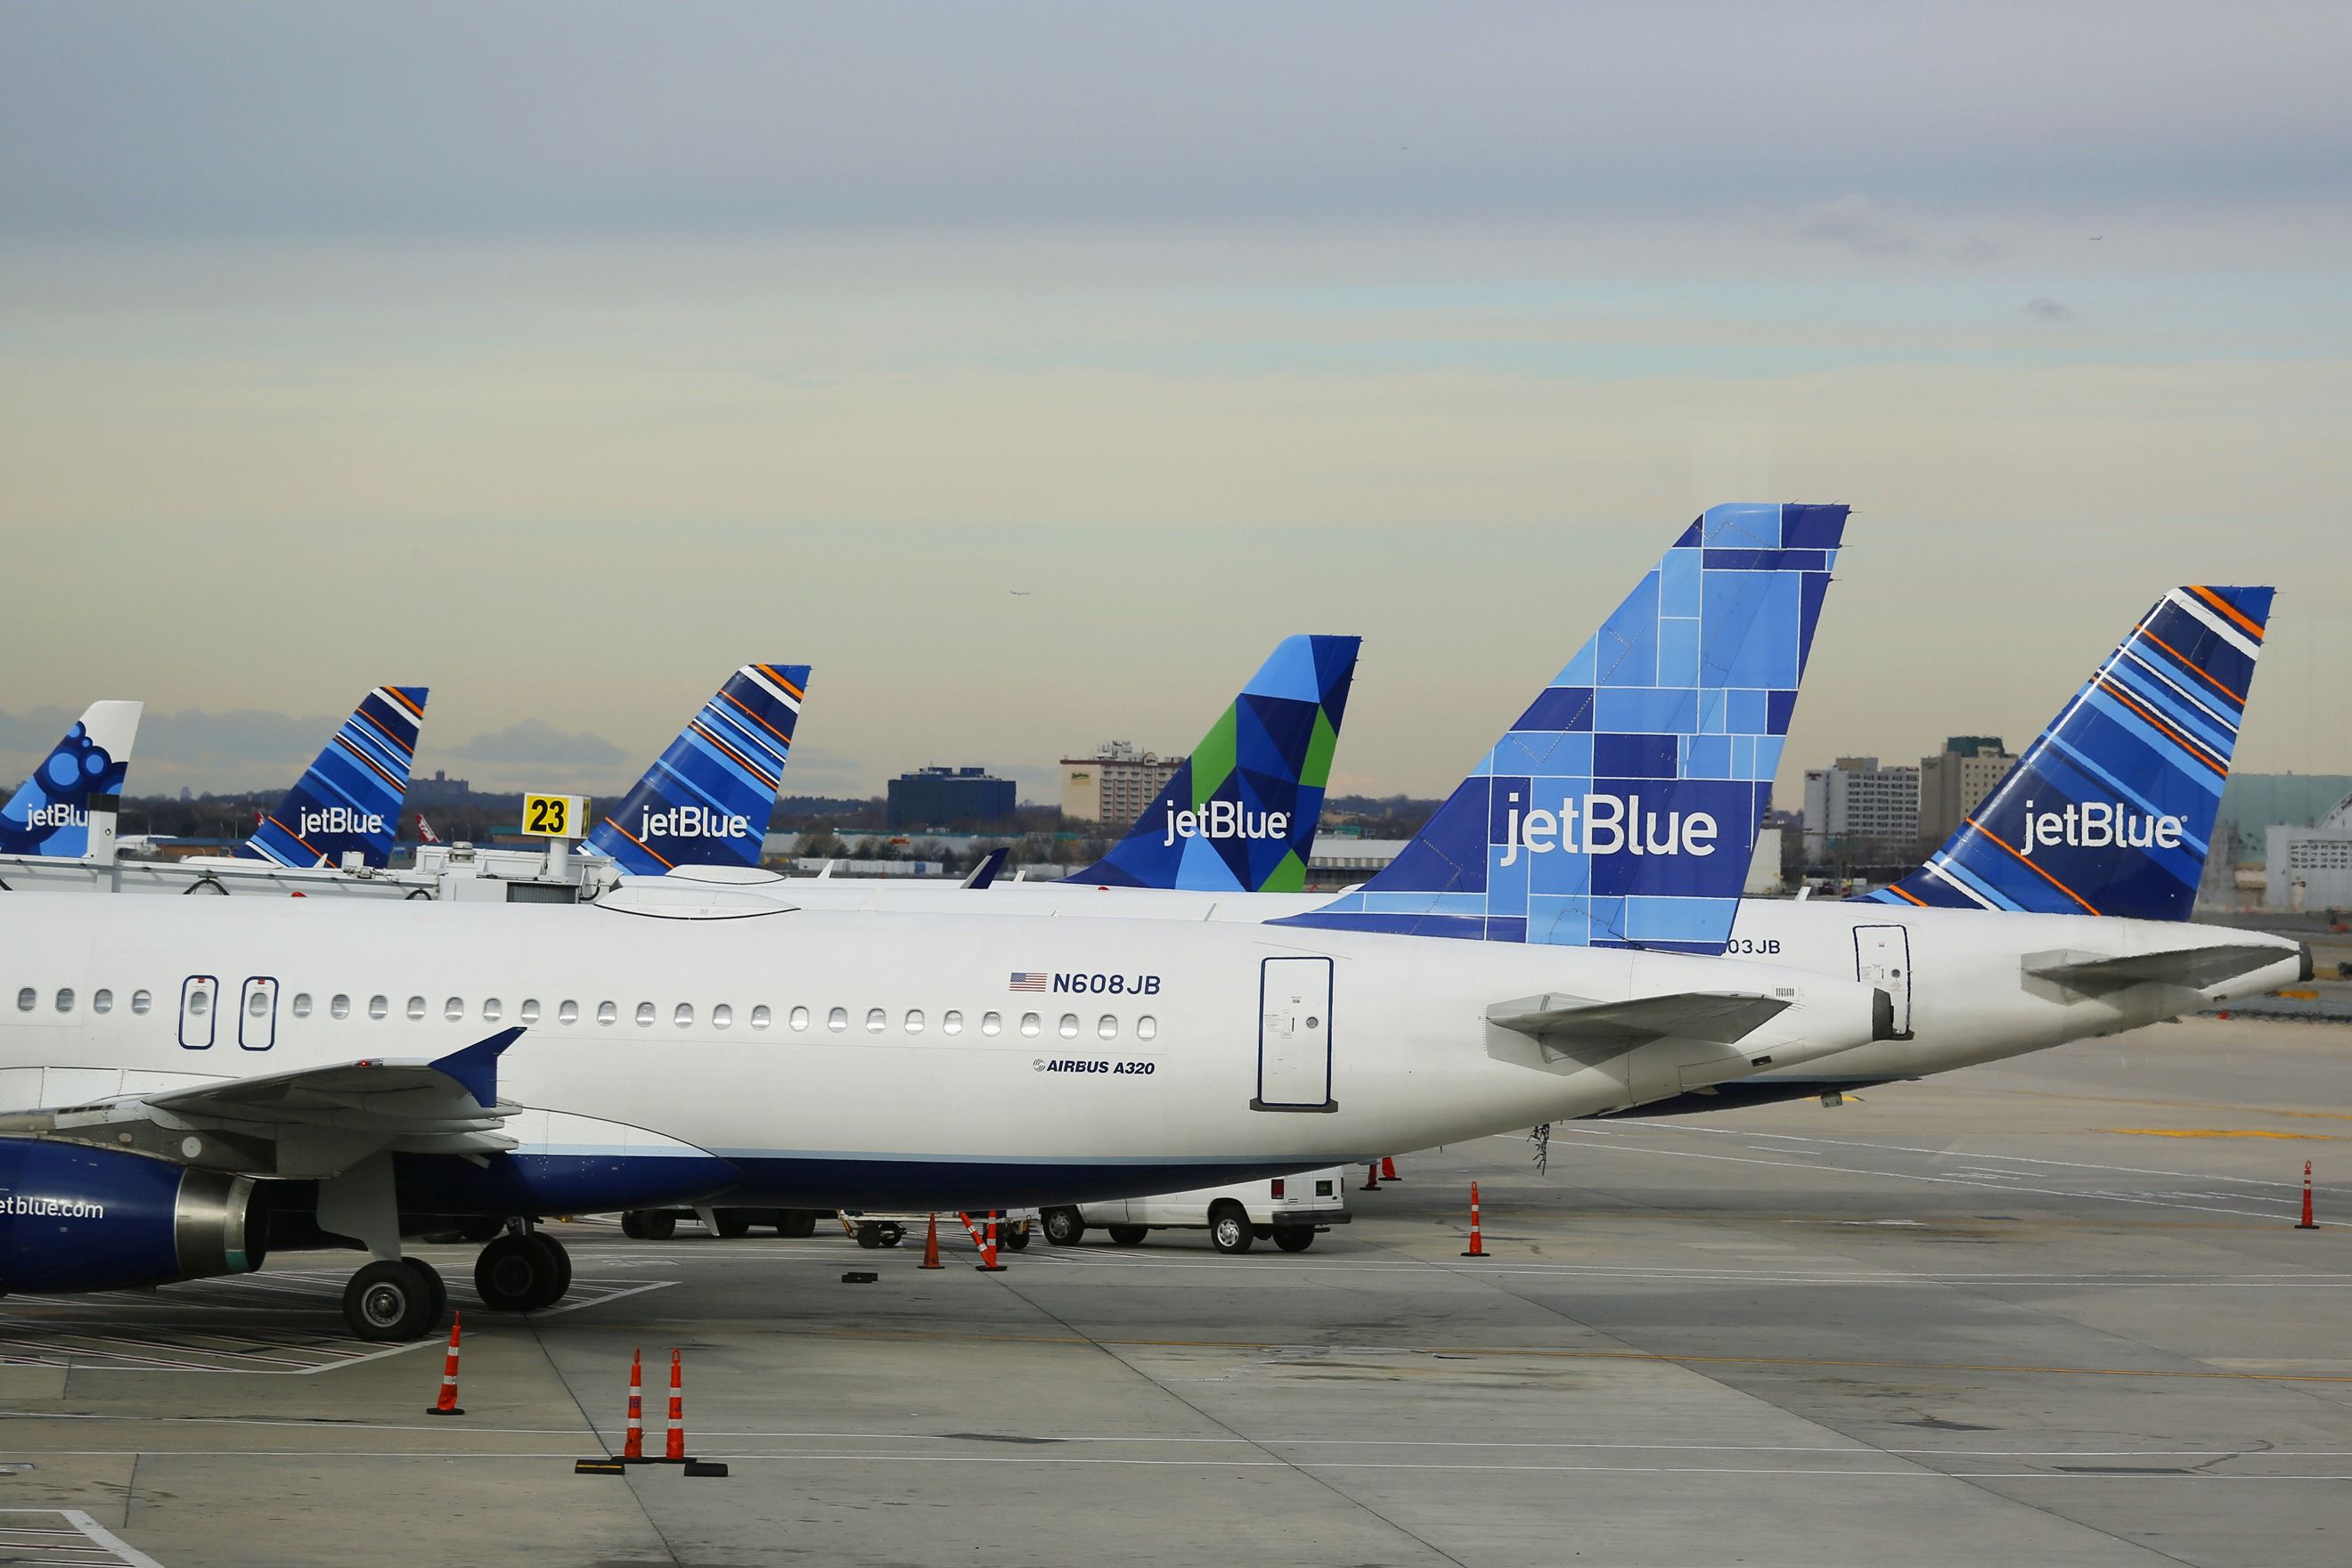 Several JetBlue Airbus A320 aircraft parked on the apron at New York JFK Airport.